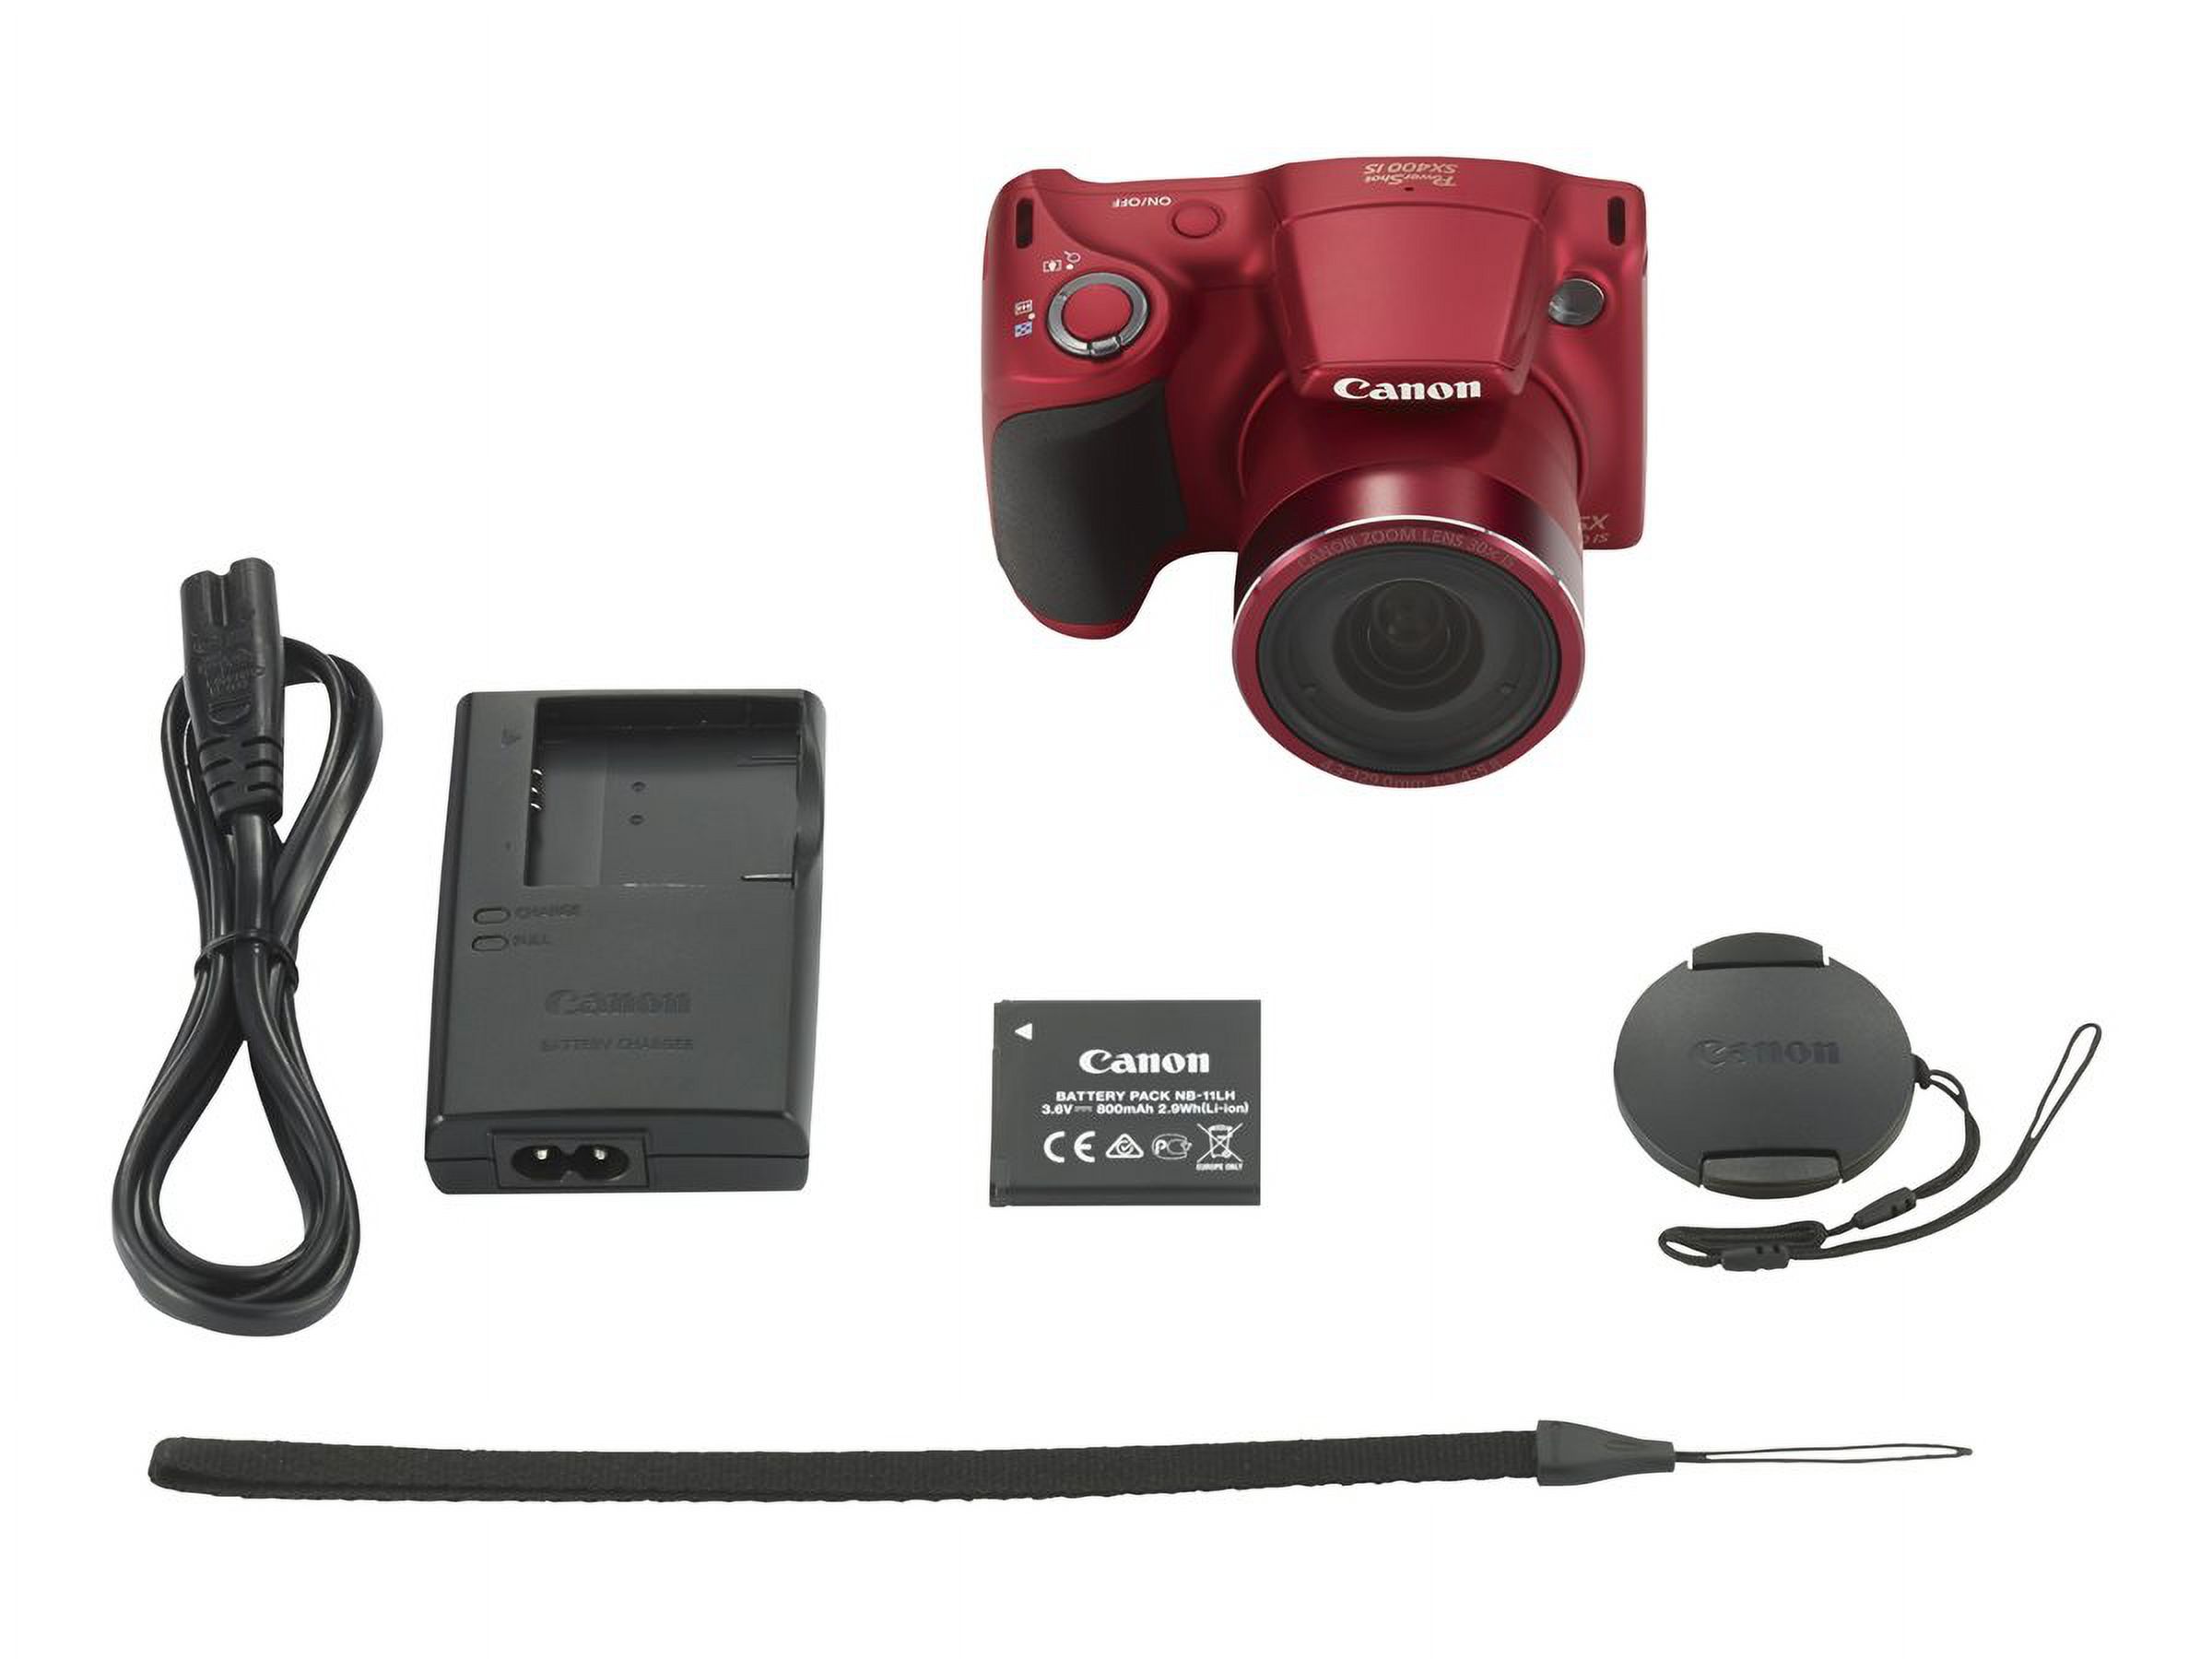 Canon PowerShot SX400 IS - Digital camera - High Definition - compact - 16.0 MP - 30 x optical zoom - red - image 27 of 72